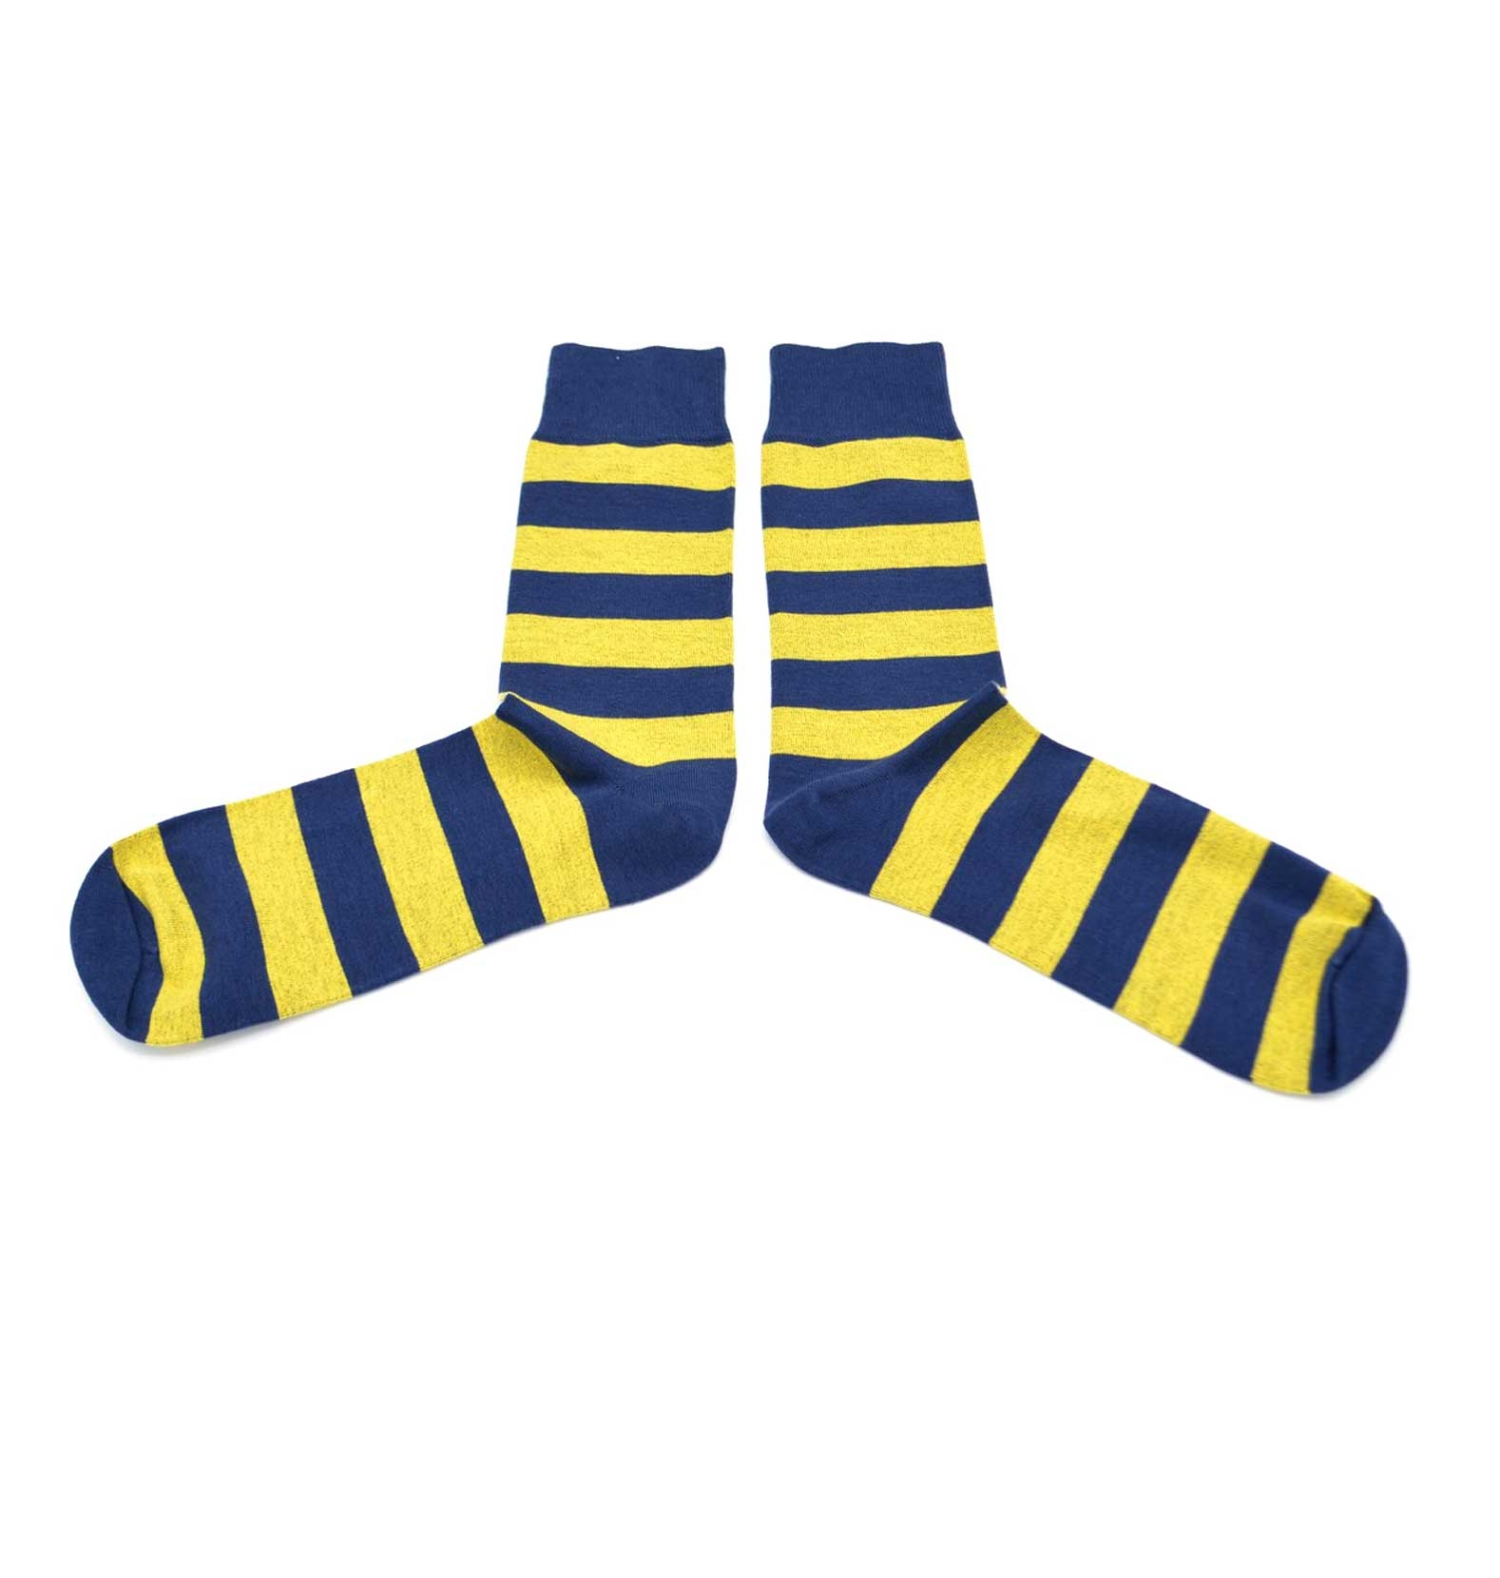 Yellow socks with blue stripes